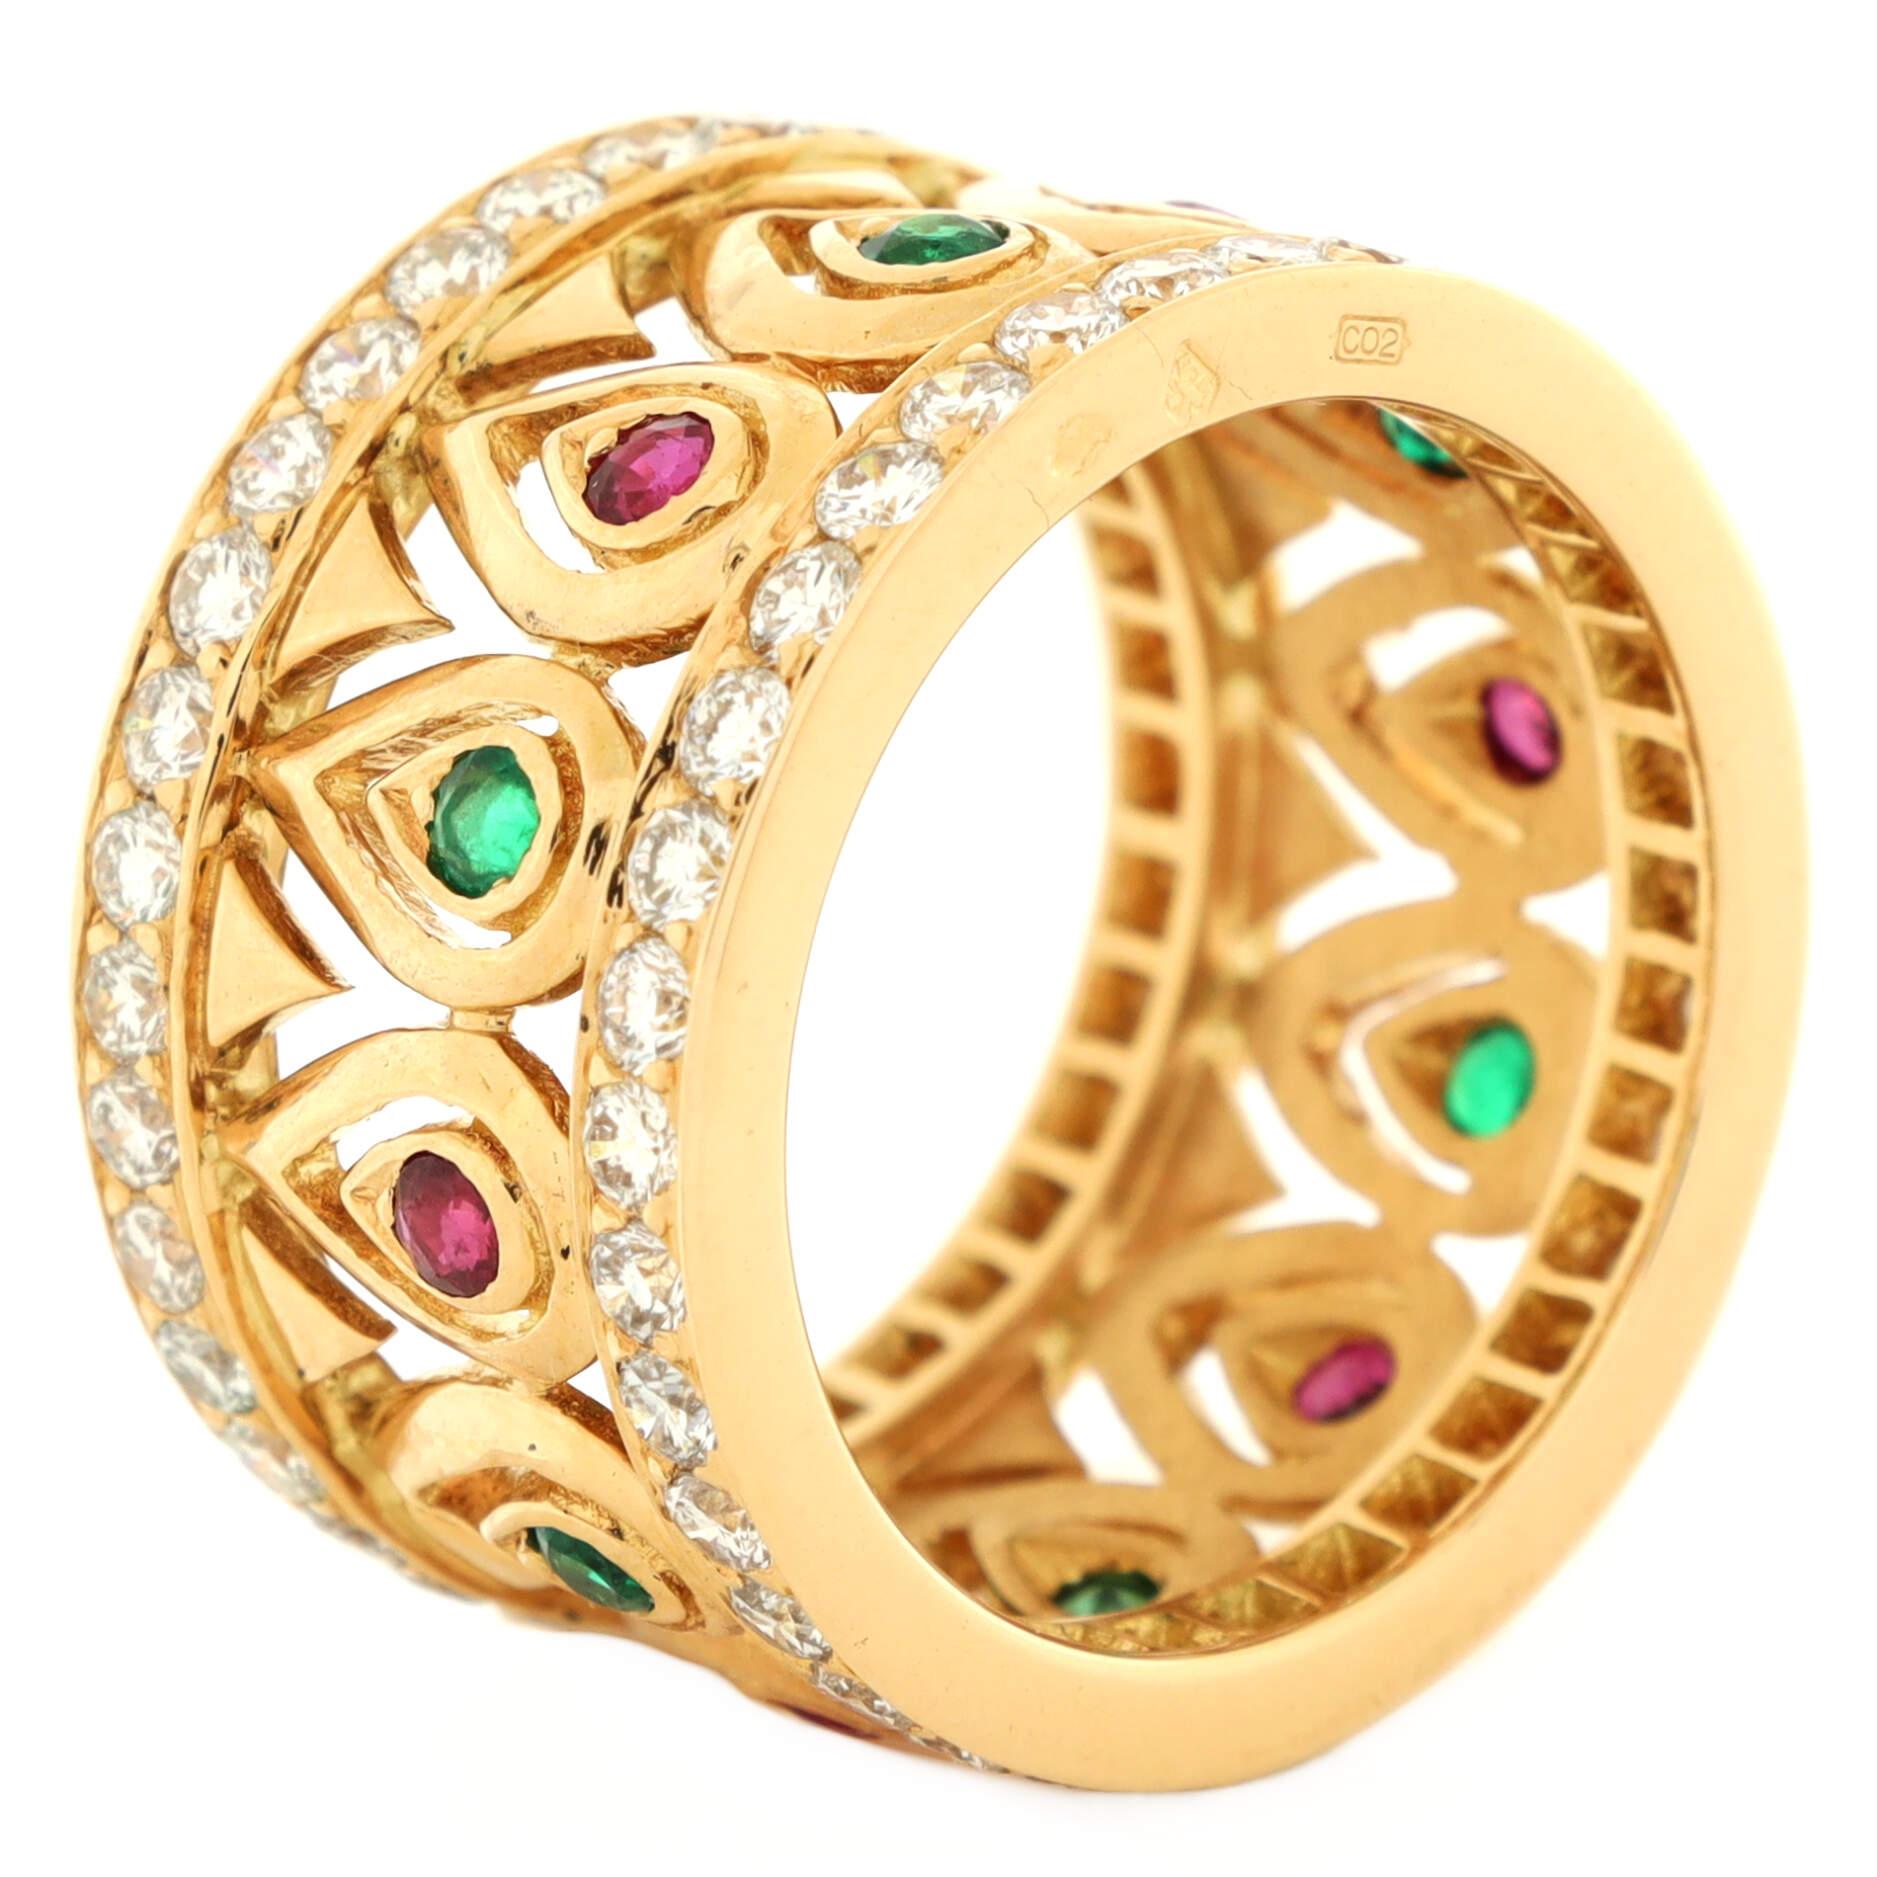 Cartier Tanjore Band Ring 18K Yellow Gold with Rubies, Emeralds and Pave  In Good Condition For Sale In New York, NY